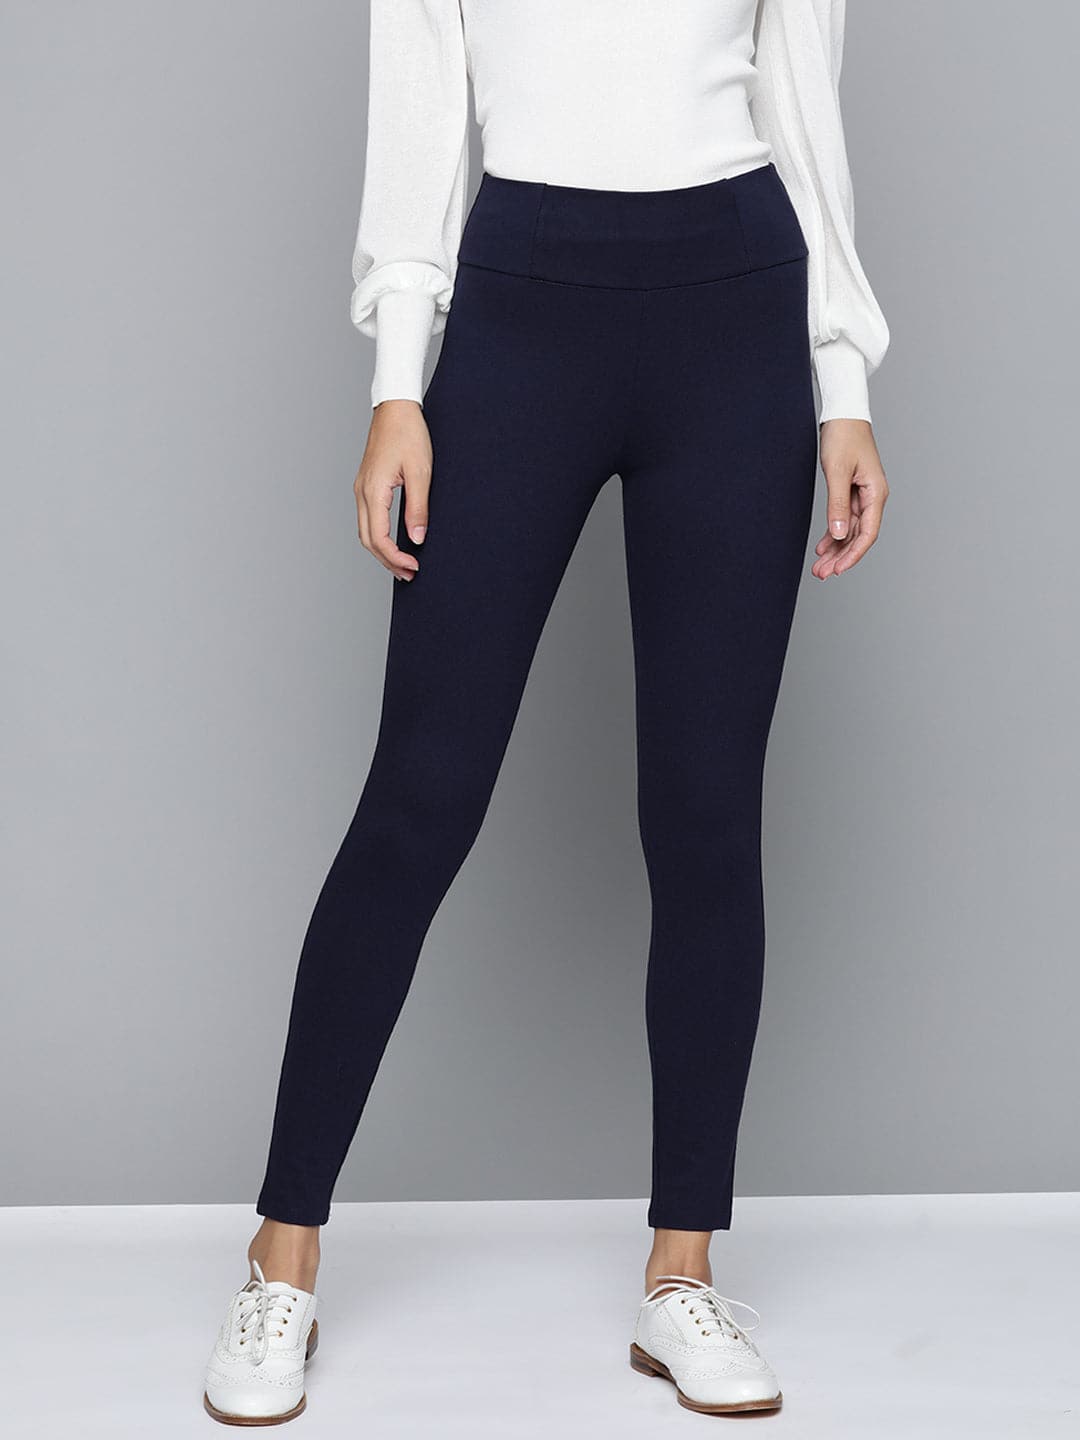 Buy Comfortable Jeggings for Women Online at Best Prices